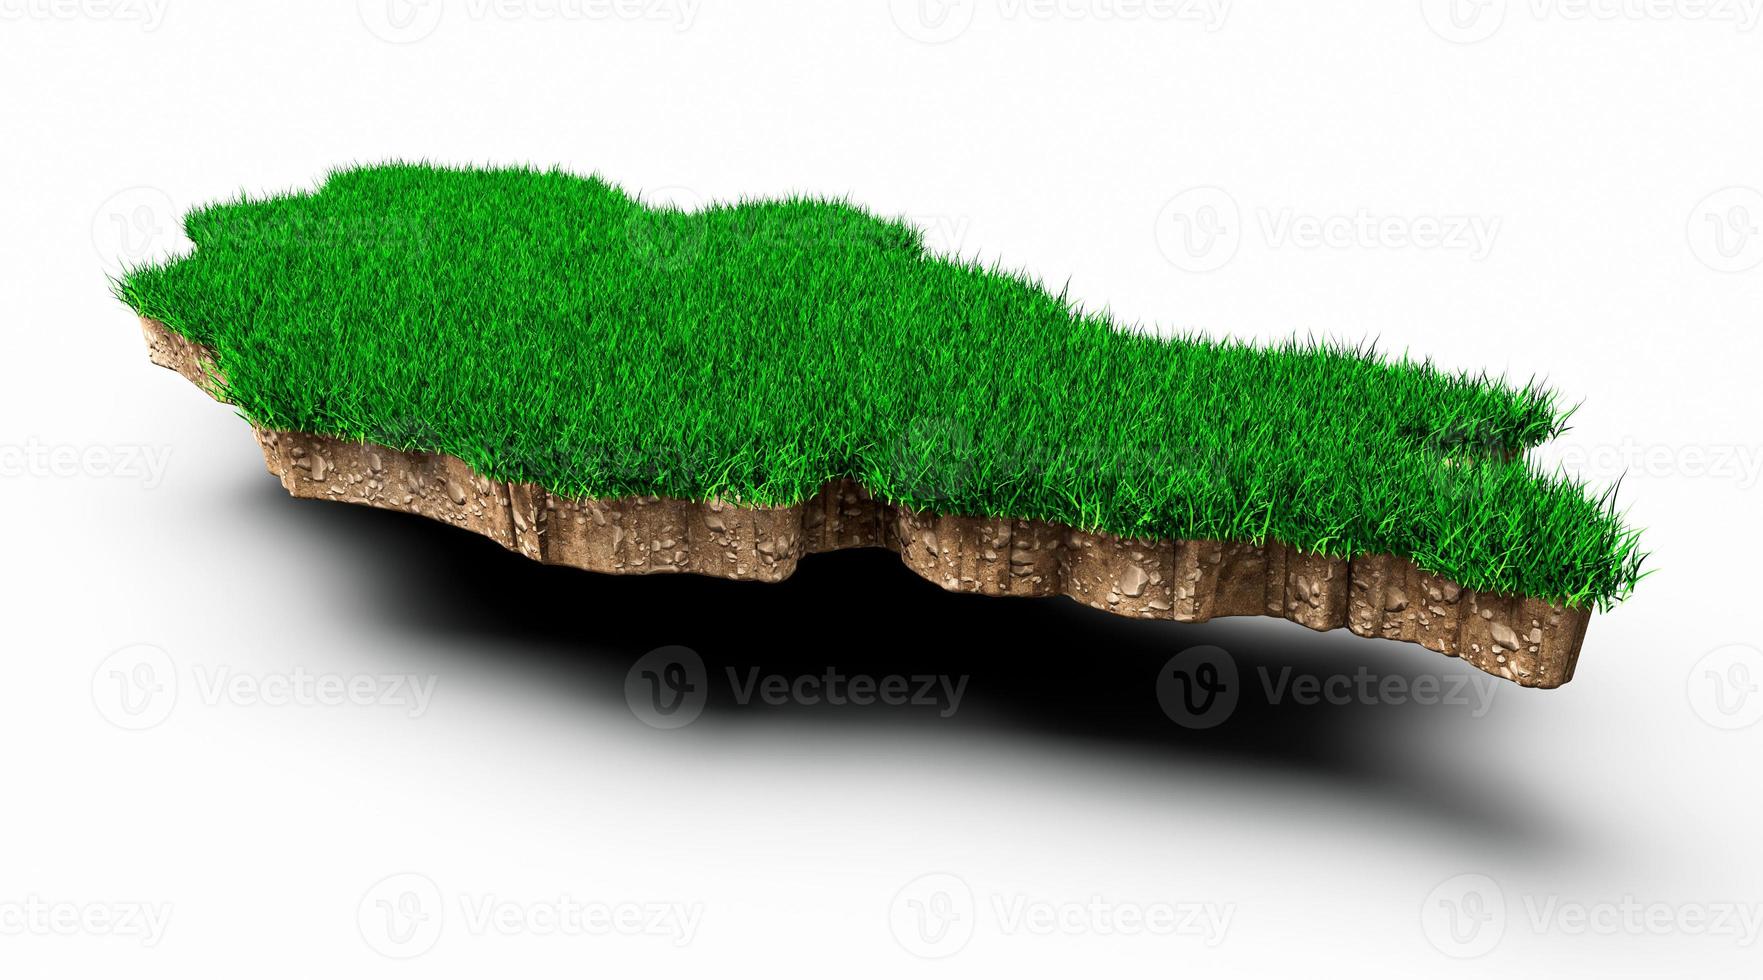 Mongolia Map soil land geology cross section with green grass and Rock ground texture 3d illustration photo